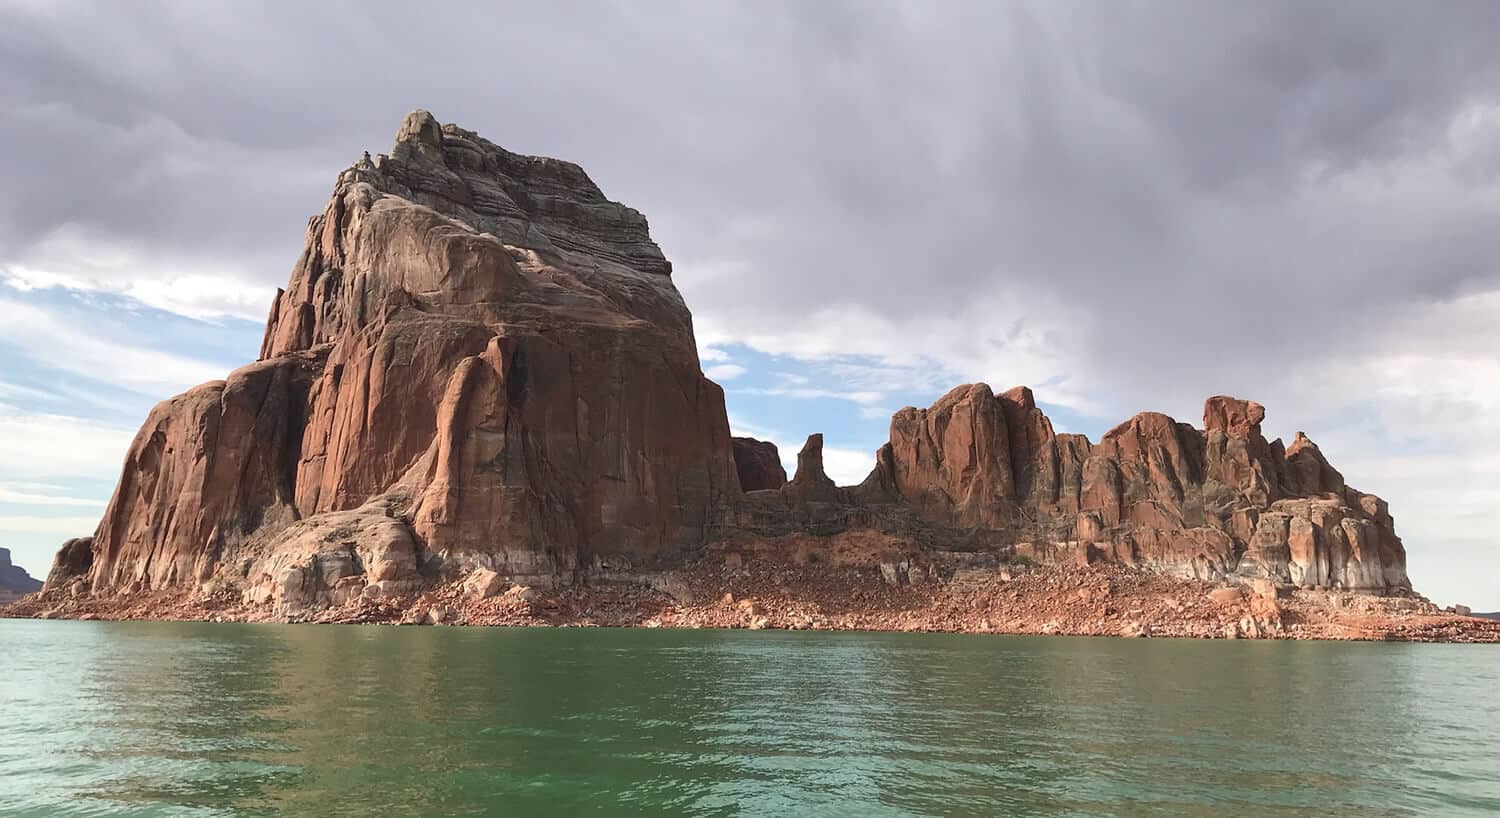 View across water toward pointed cathedral looking red rocks under cloudy sky